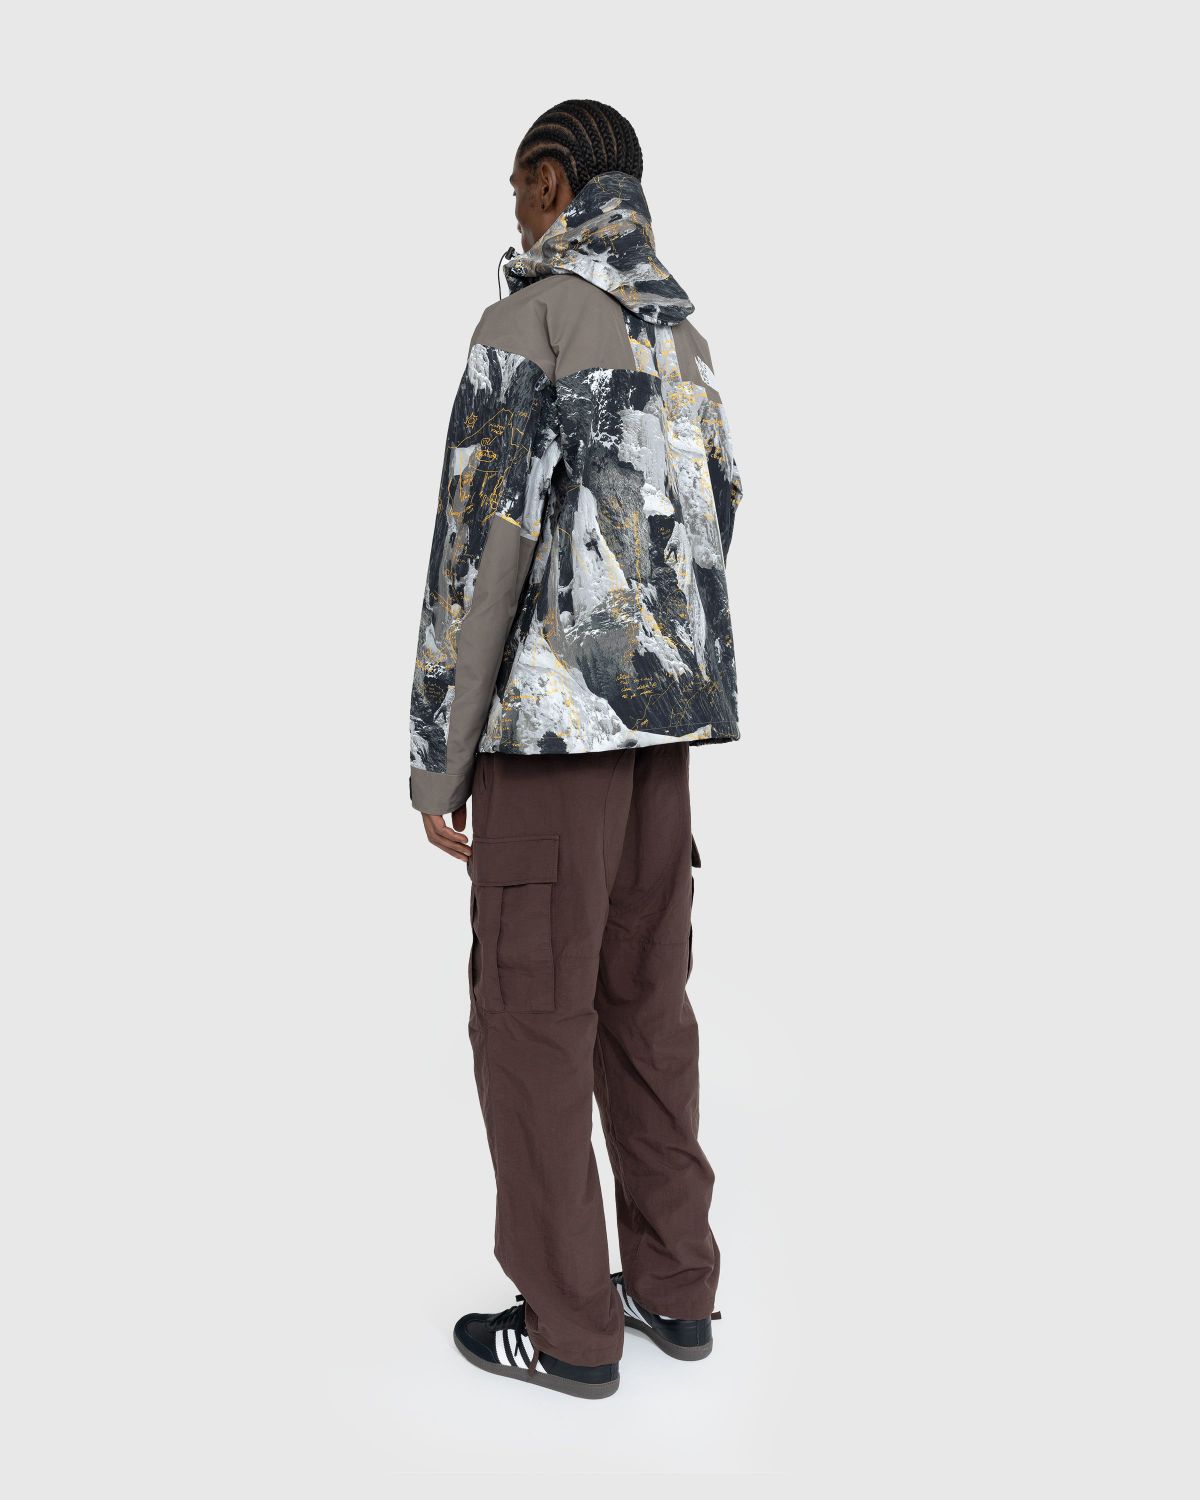 The North Face – GORE-TEX Mountain Jacket Falcon Brown Conrads Notes Print - Outerwear - Multi - Image 4